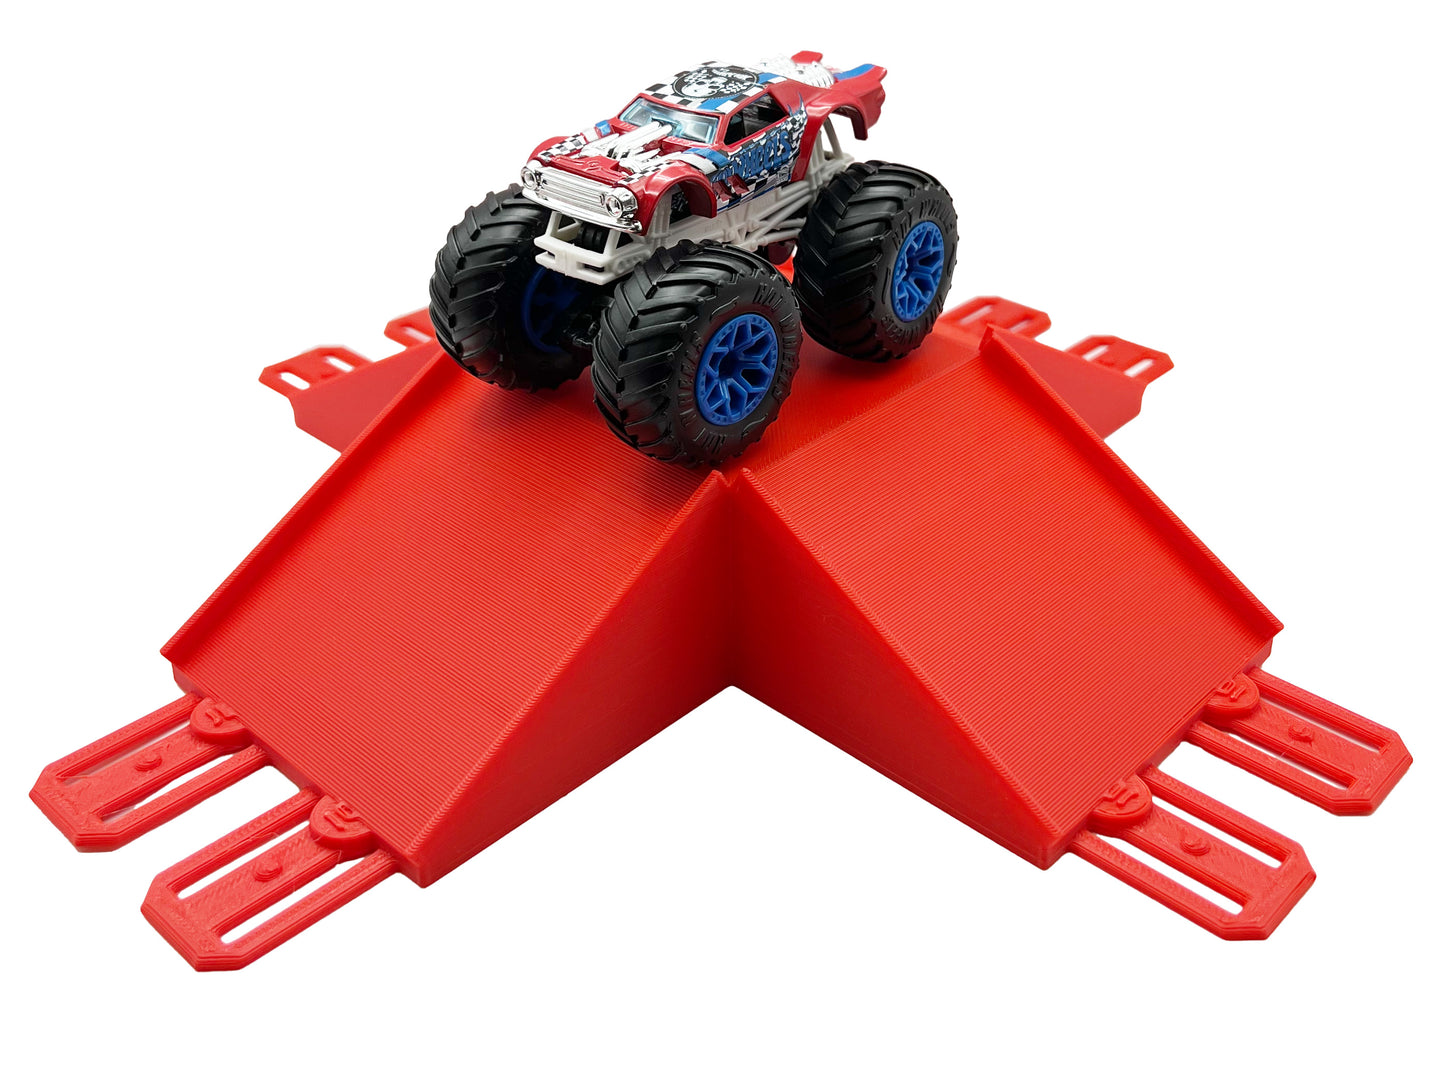 Jeff Did It! - Hot Wheels Monster Truck - 2 Lane 4 Way Table Top Jump - 3D Printed - Designed and Made in the USA